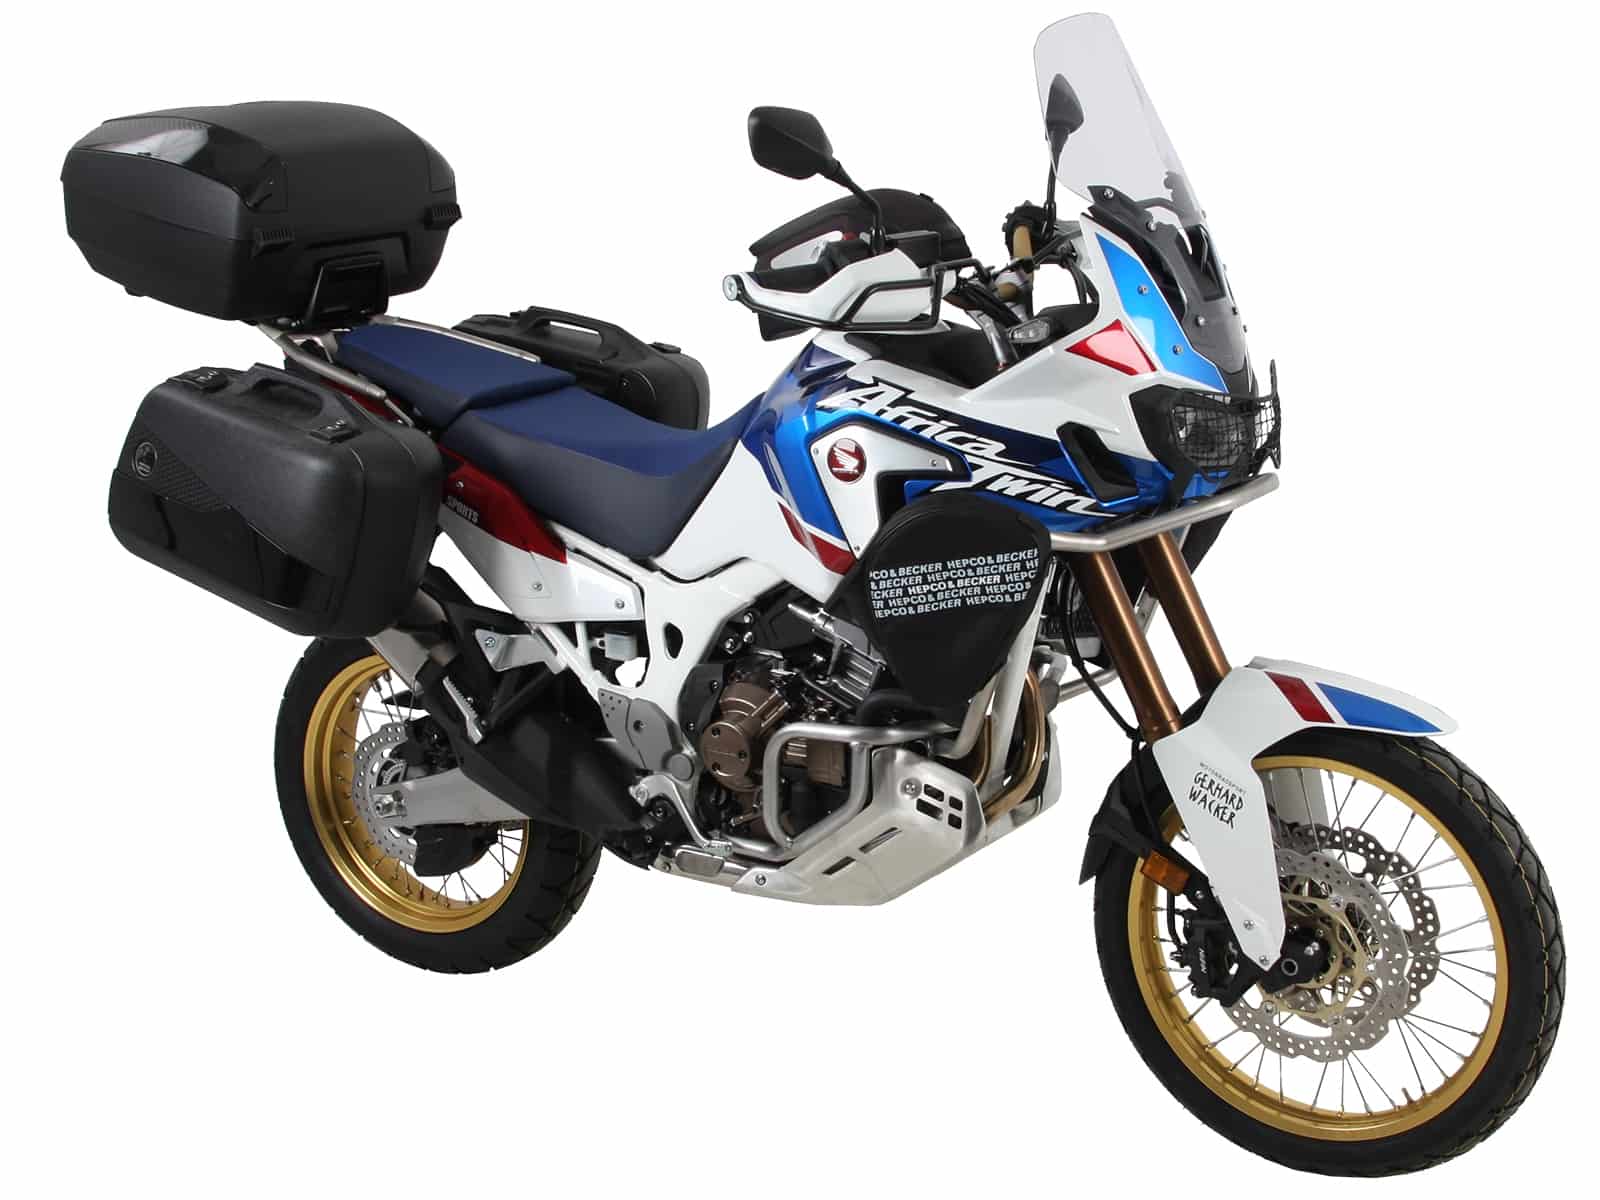 Sidecarrier permanent mounted black for Honda CRF1000L Africa Twin (2018-2019)